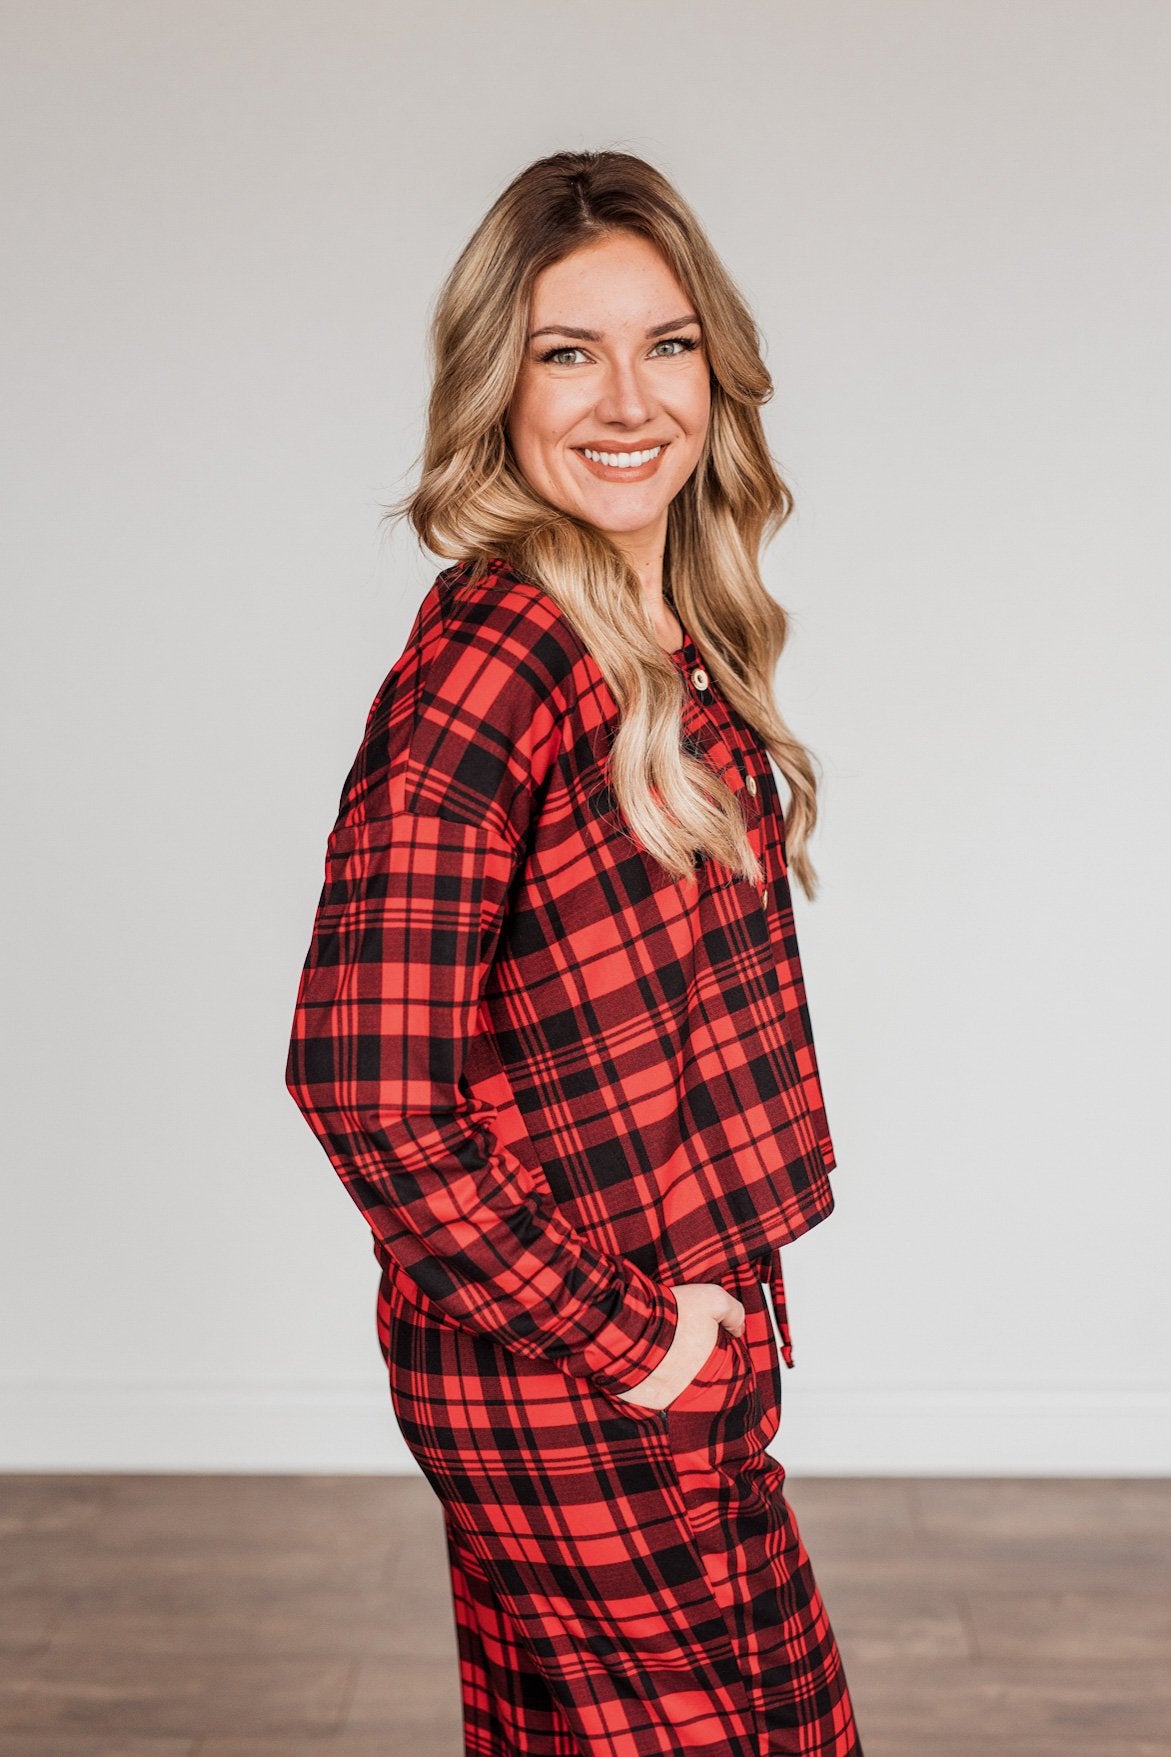 Chasing Snowflakes Plaid Lounge Top- Red & Black